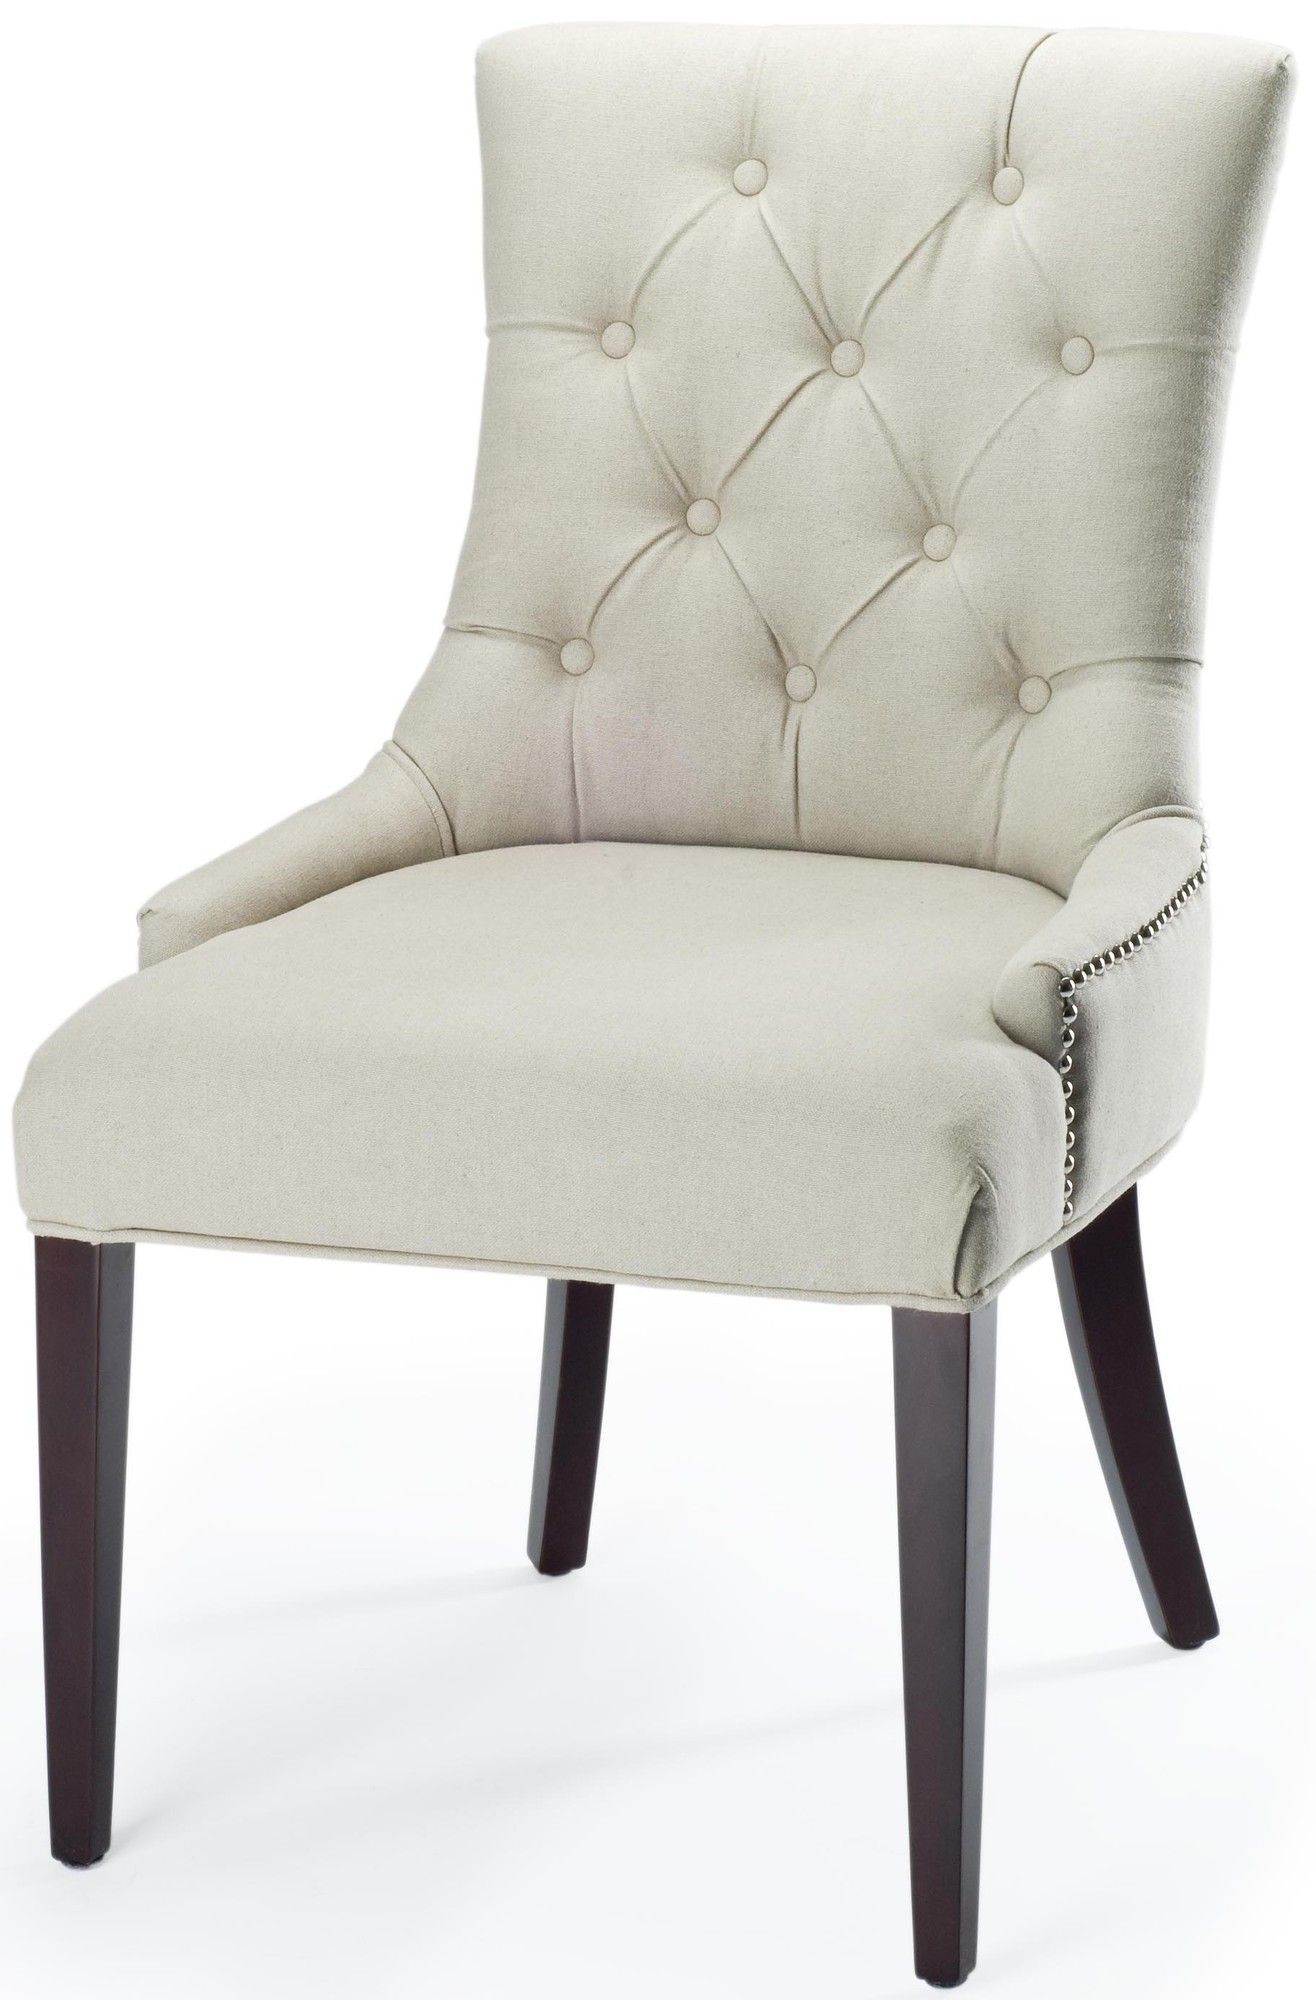 Most Recently Released Tanya Side Chair – The Northern Star On Joss & Main (View 1 of 20)